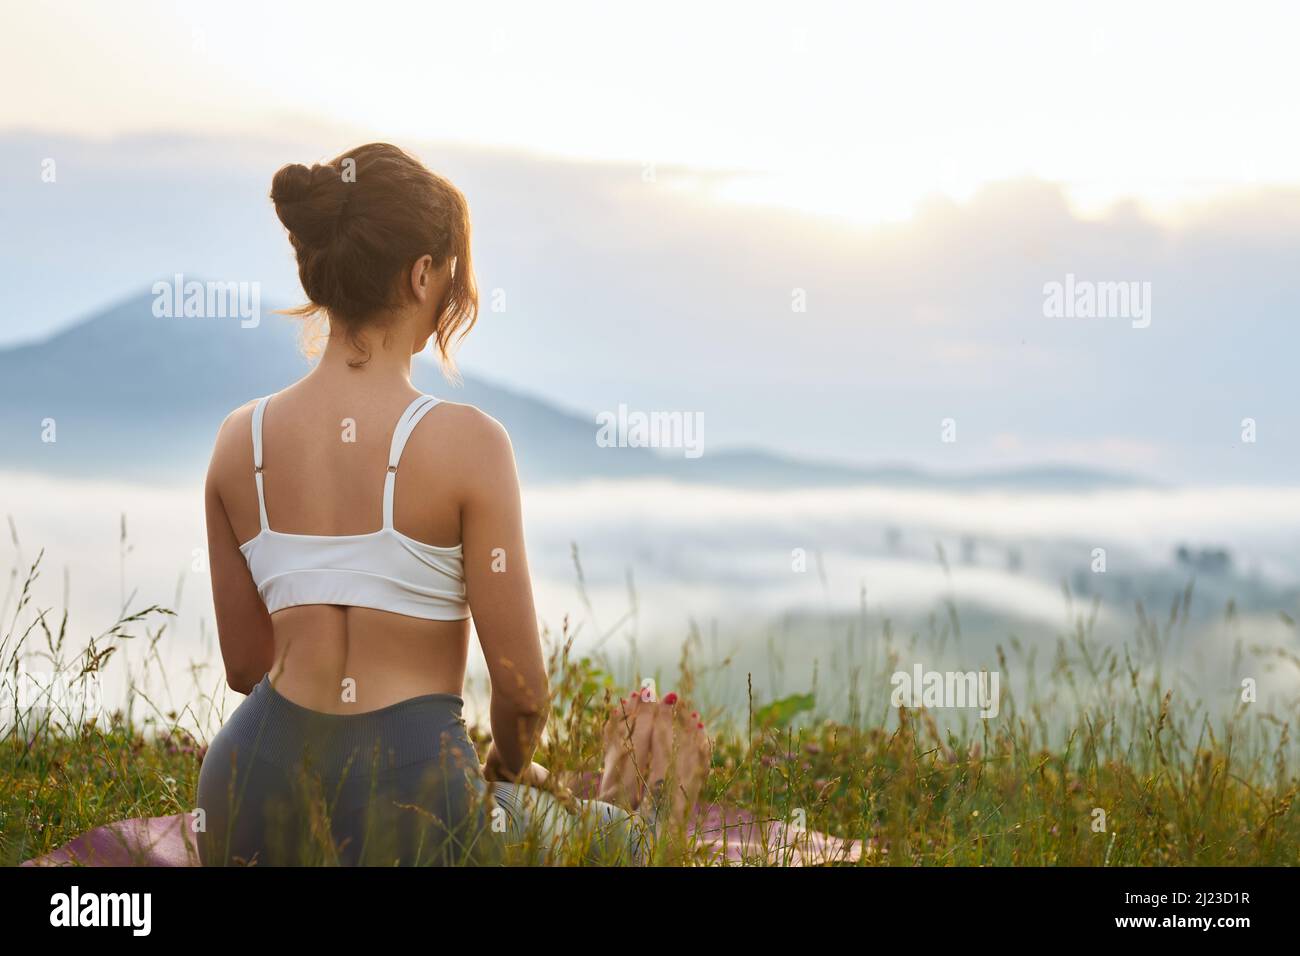 Back panoramic view of female sitting on legs with hands on knees. Woman looking forward, enjoying scenery, practicing yoga outdoors. Concept of harmony with nature. Stock Photo